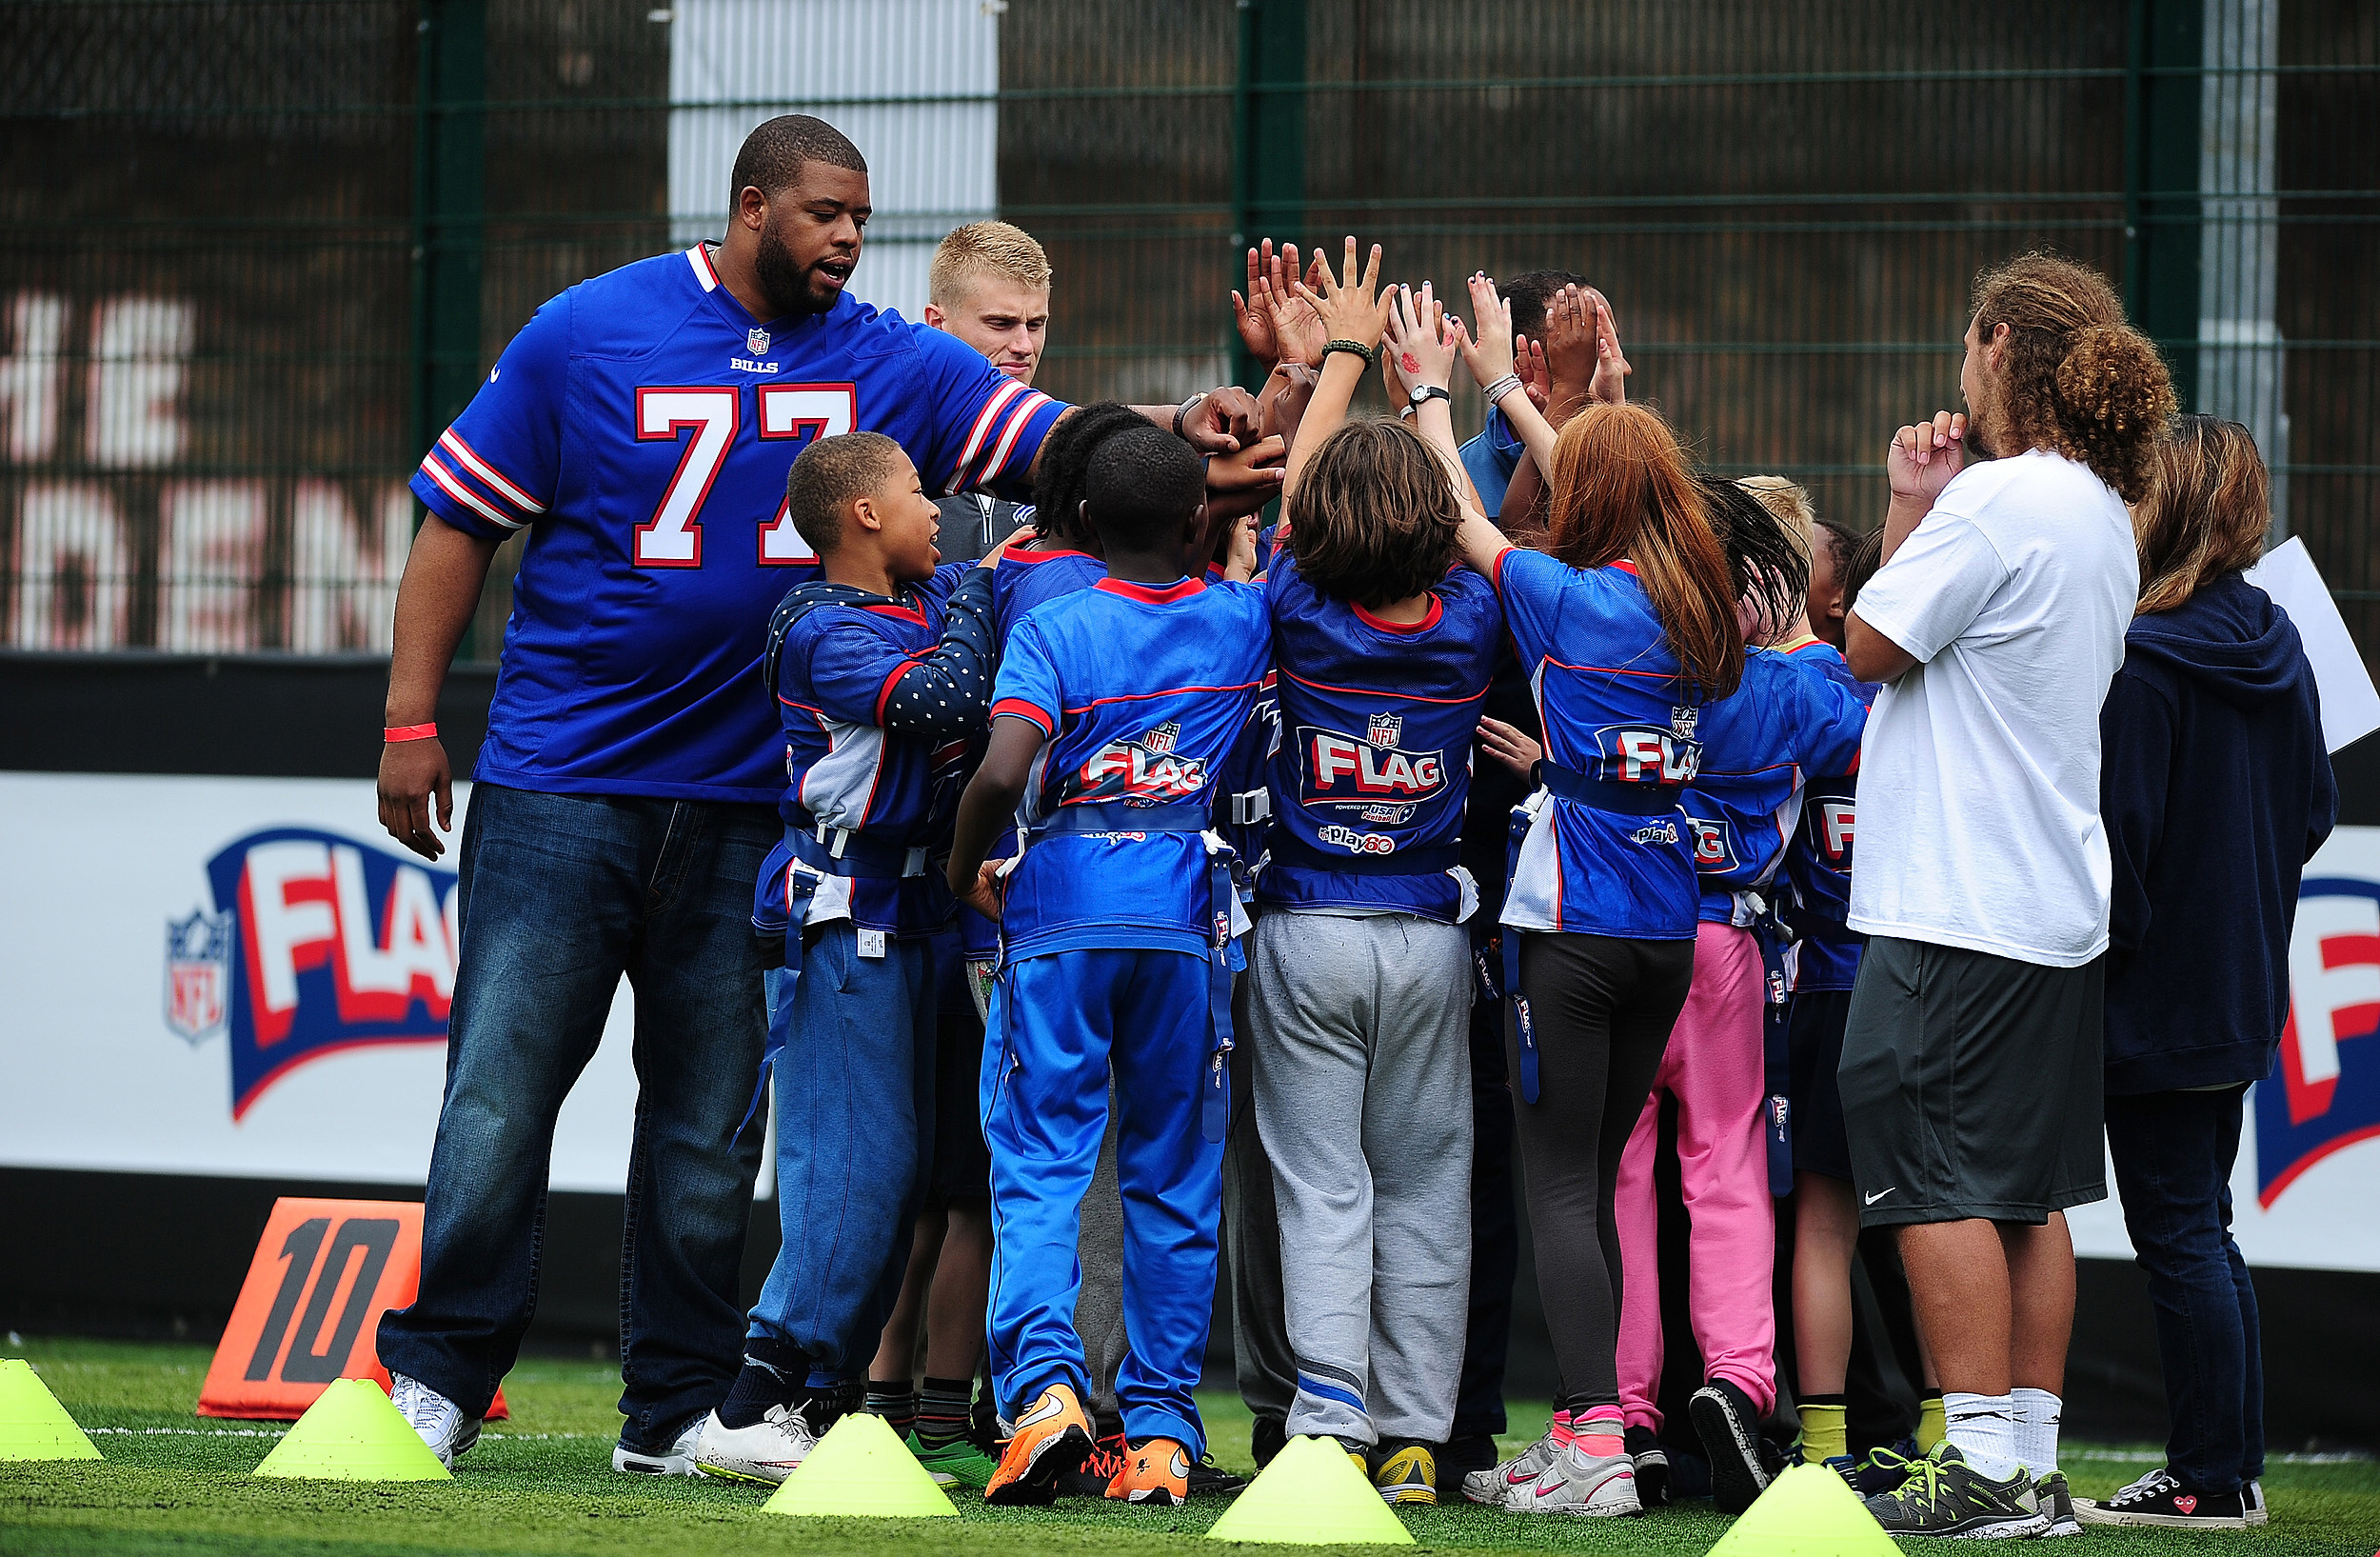 Buffalo Bills Kids Day Set with Power Wheel, Inflatables + More